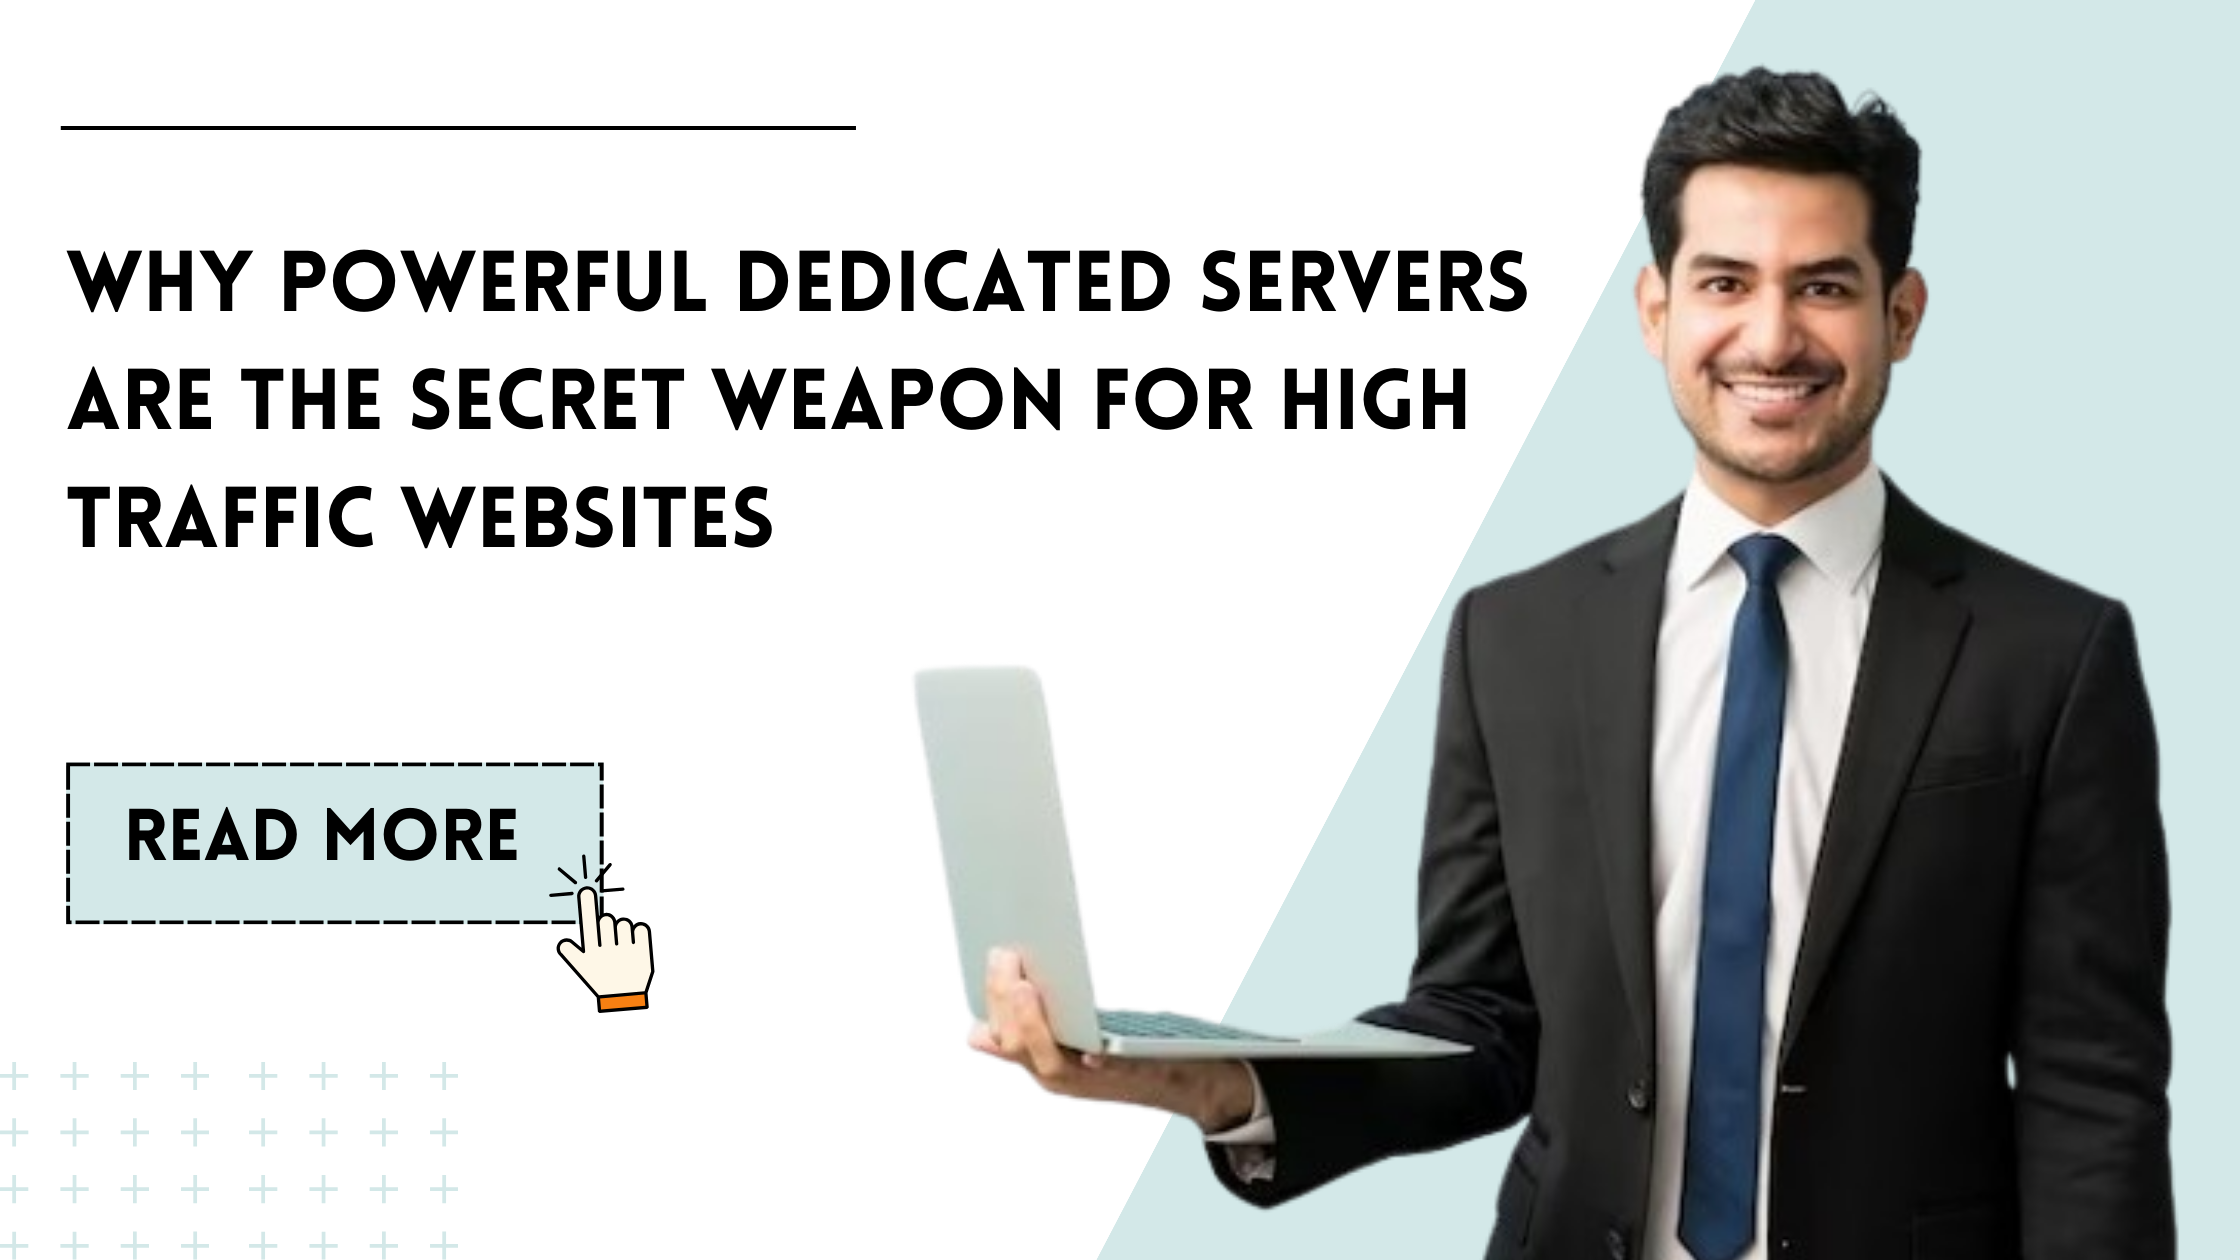 Why Powerful Dedicated Servers Are the Secret Weapon for High-Traffic Websites